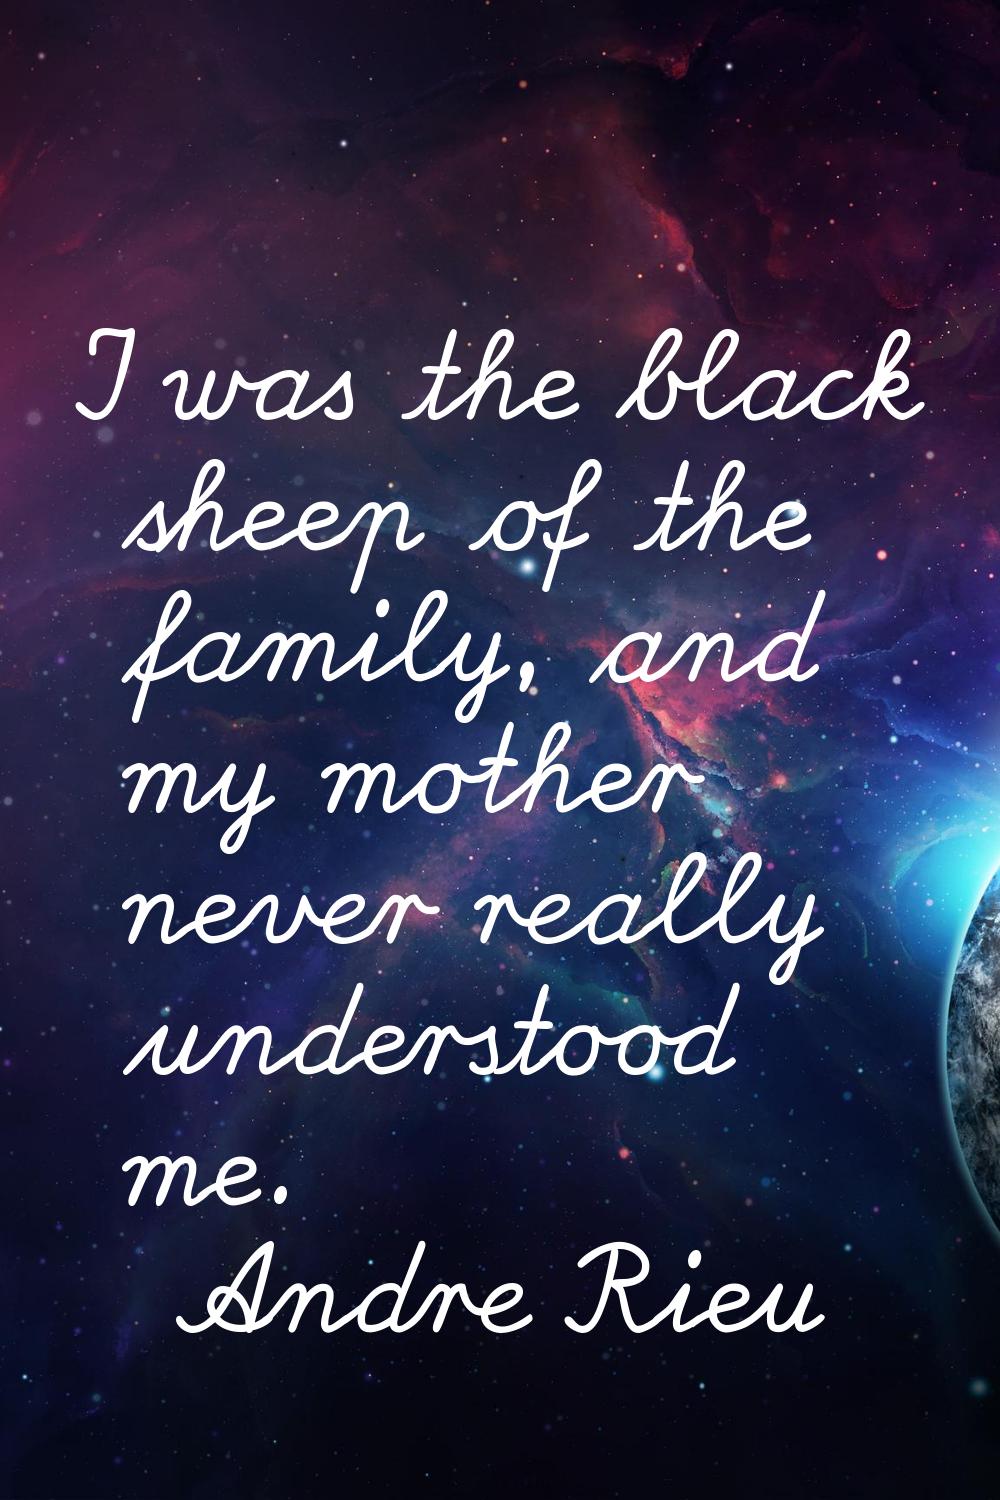 I was the black sheep of the family, and my mother never really understood me.